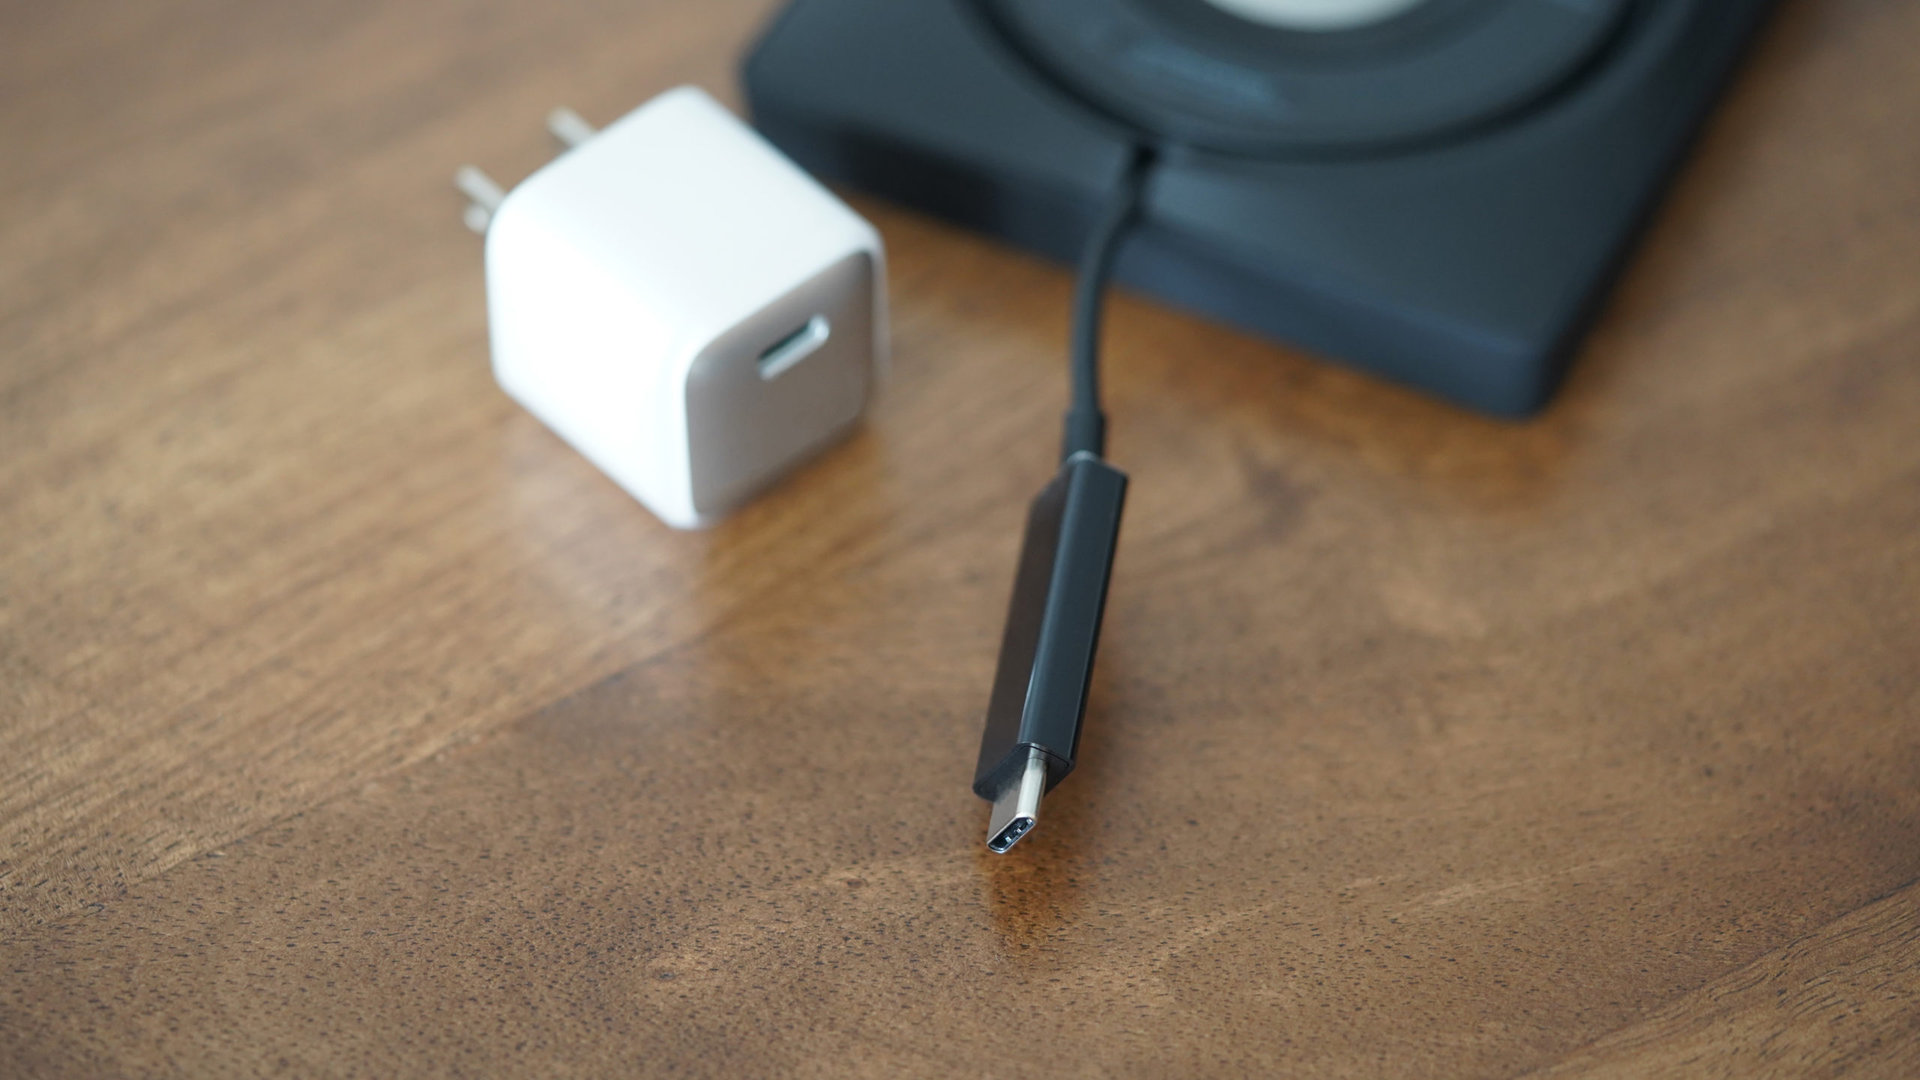 The USB-C cable requires a wall charger purchased separately.